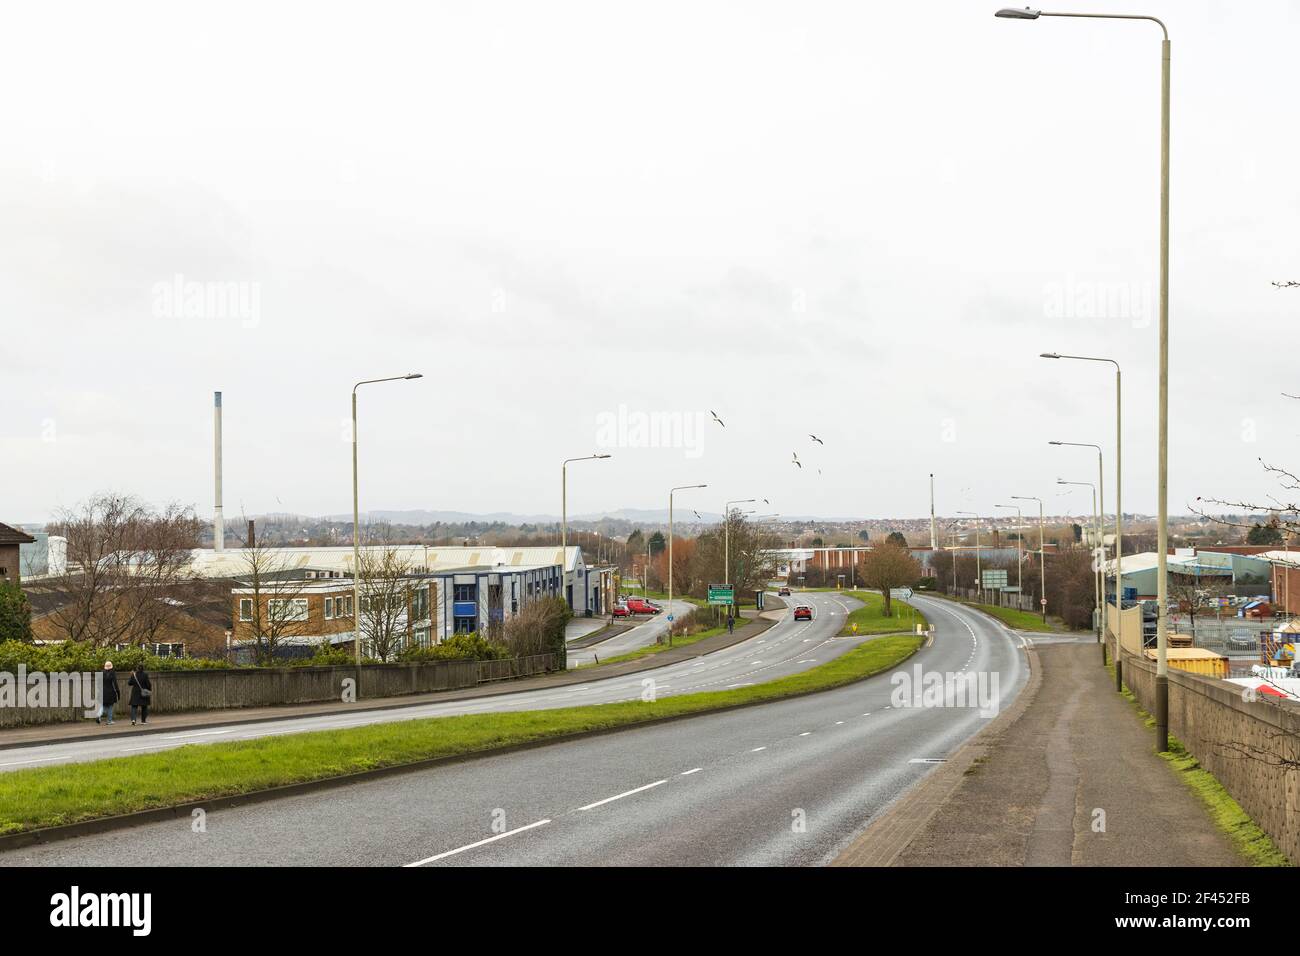 Main road junction on Thurmaston Road A563, roundabout, lamp posts and industrial units. Charnwood Forest and Old John Tower in distance. Stock Photo